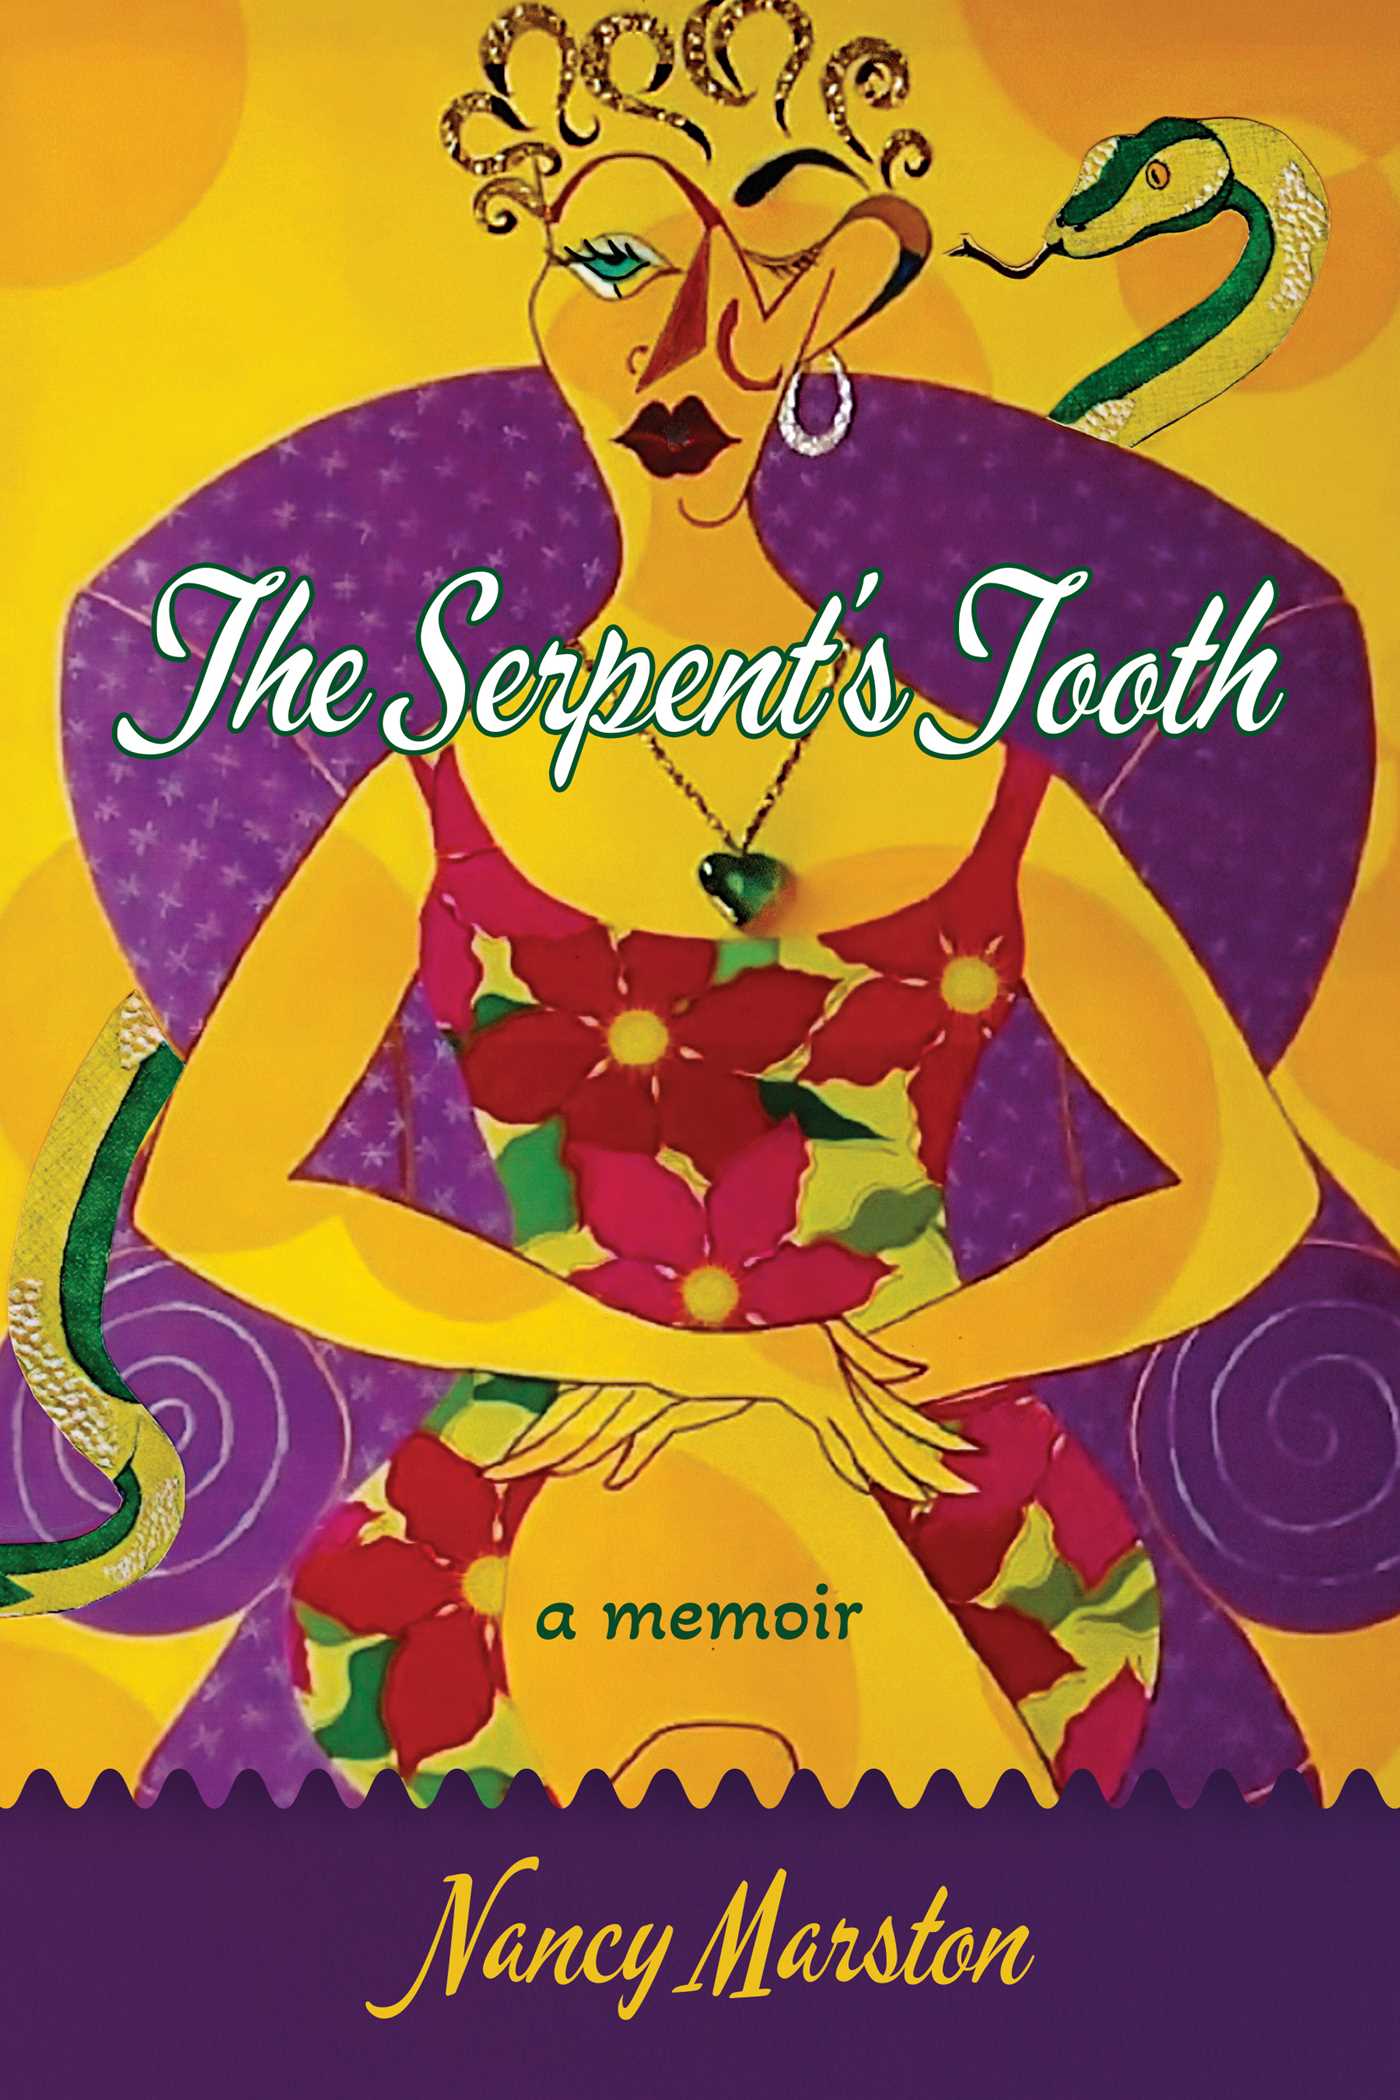 The Serpent's Tooth | Marston, Nancy